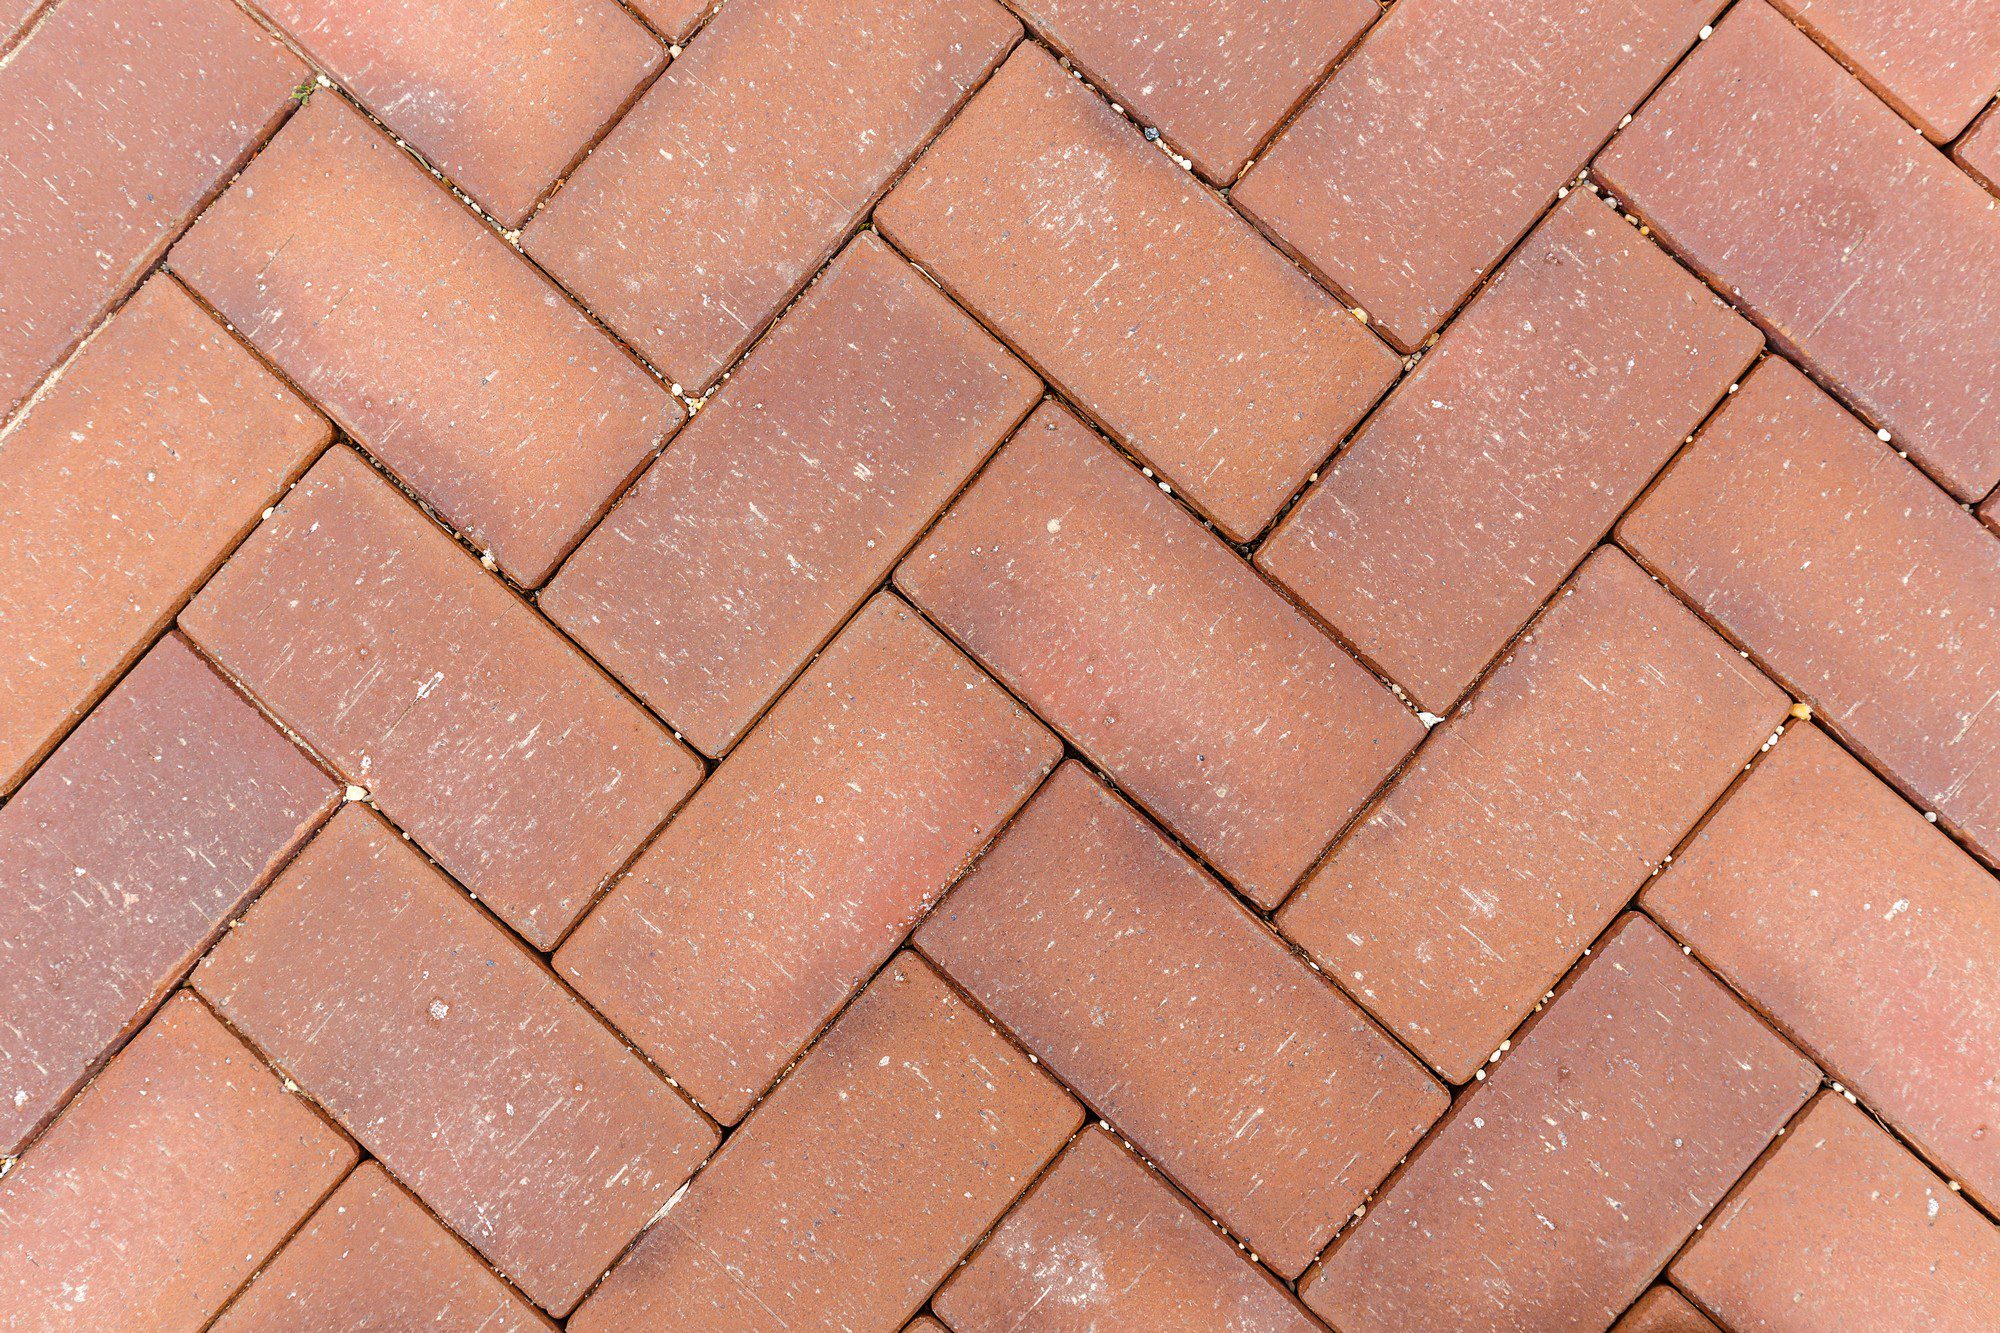 This image shows a surface covered with interlocking brick pavers arranged in a herringbone pattern. The bricks are reddish-brown in colour and there are visible small gaps filled with sand or another fine material that helps to keep the bricks in place. The pavers are slightly worn, indicating that they have been walked on or used for some time. The herringbone pattern is a popular design for outdoor patios, walkways, and driveways due to its pleasing aesthetic and stability under foot traffic.